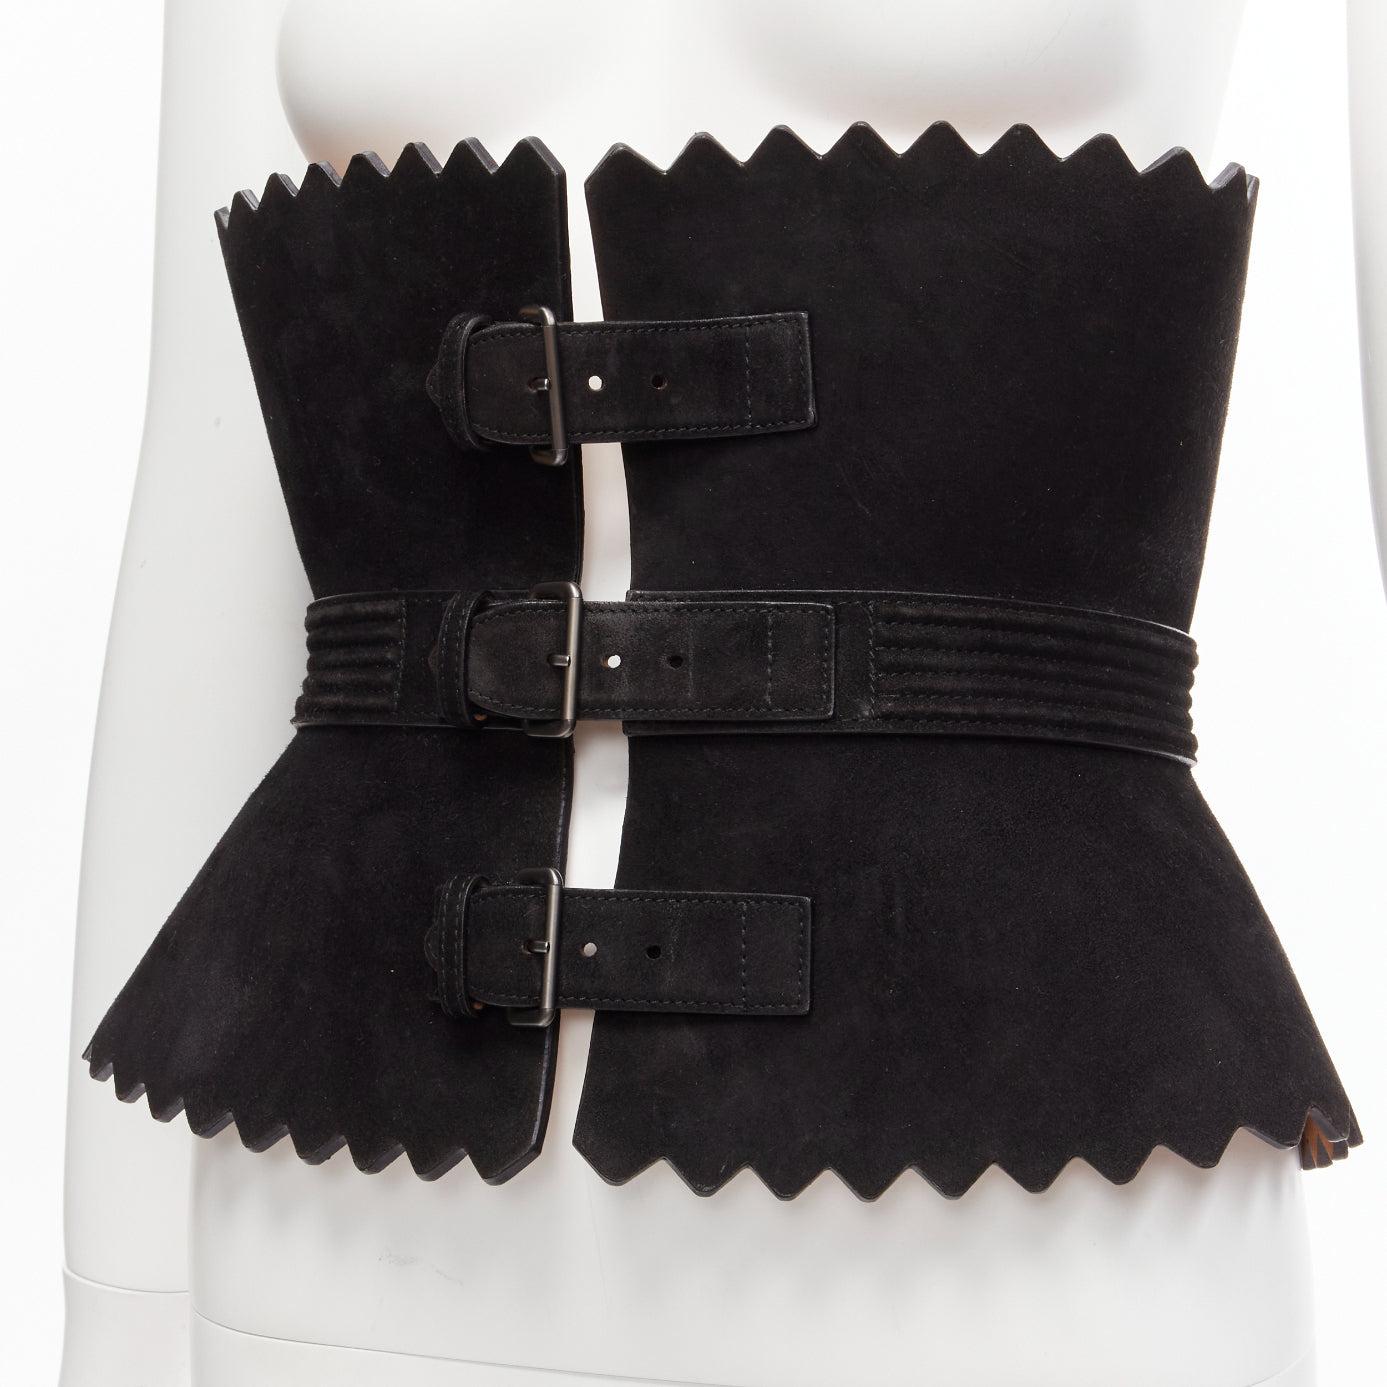 rare AZZEDINE ALAIA black suede leather wide scallop corset statement belt 70cm
Reference: BSHW/A00065
Brand: Alaia
Designer: Azzedine Alaia
Material: Suede
Color: Black
Pattern: Solid
Closure: Belt
Lining: Beige Leather
Extra Details: Quilted